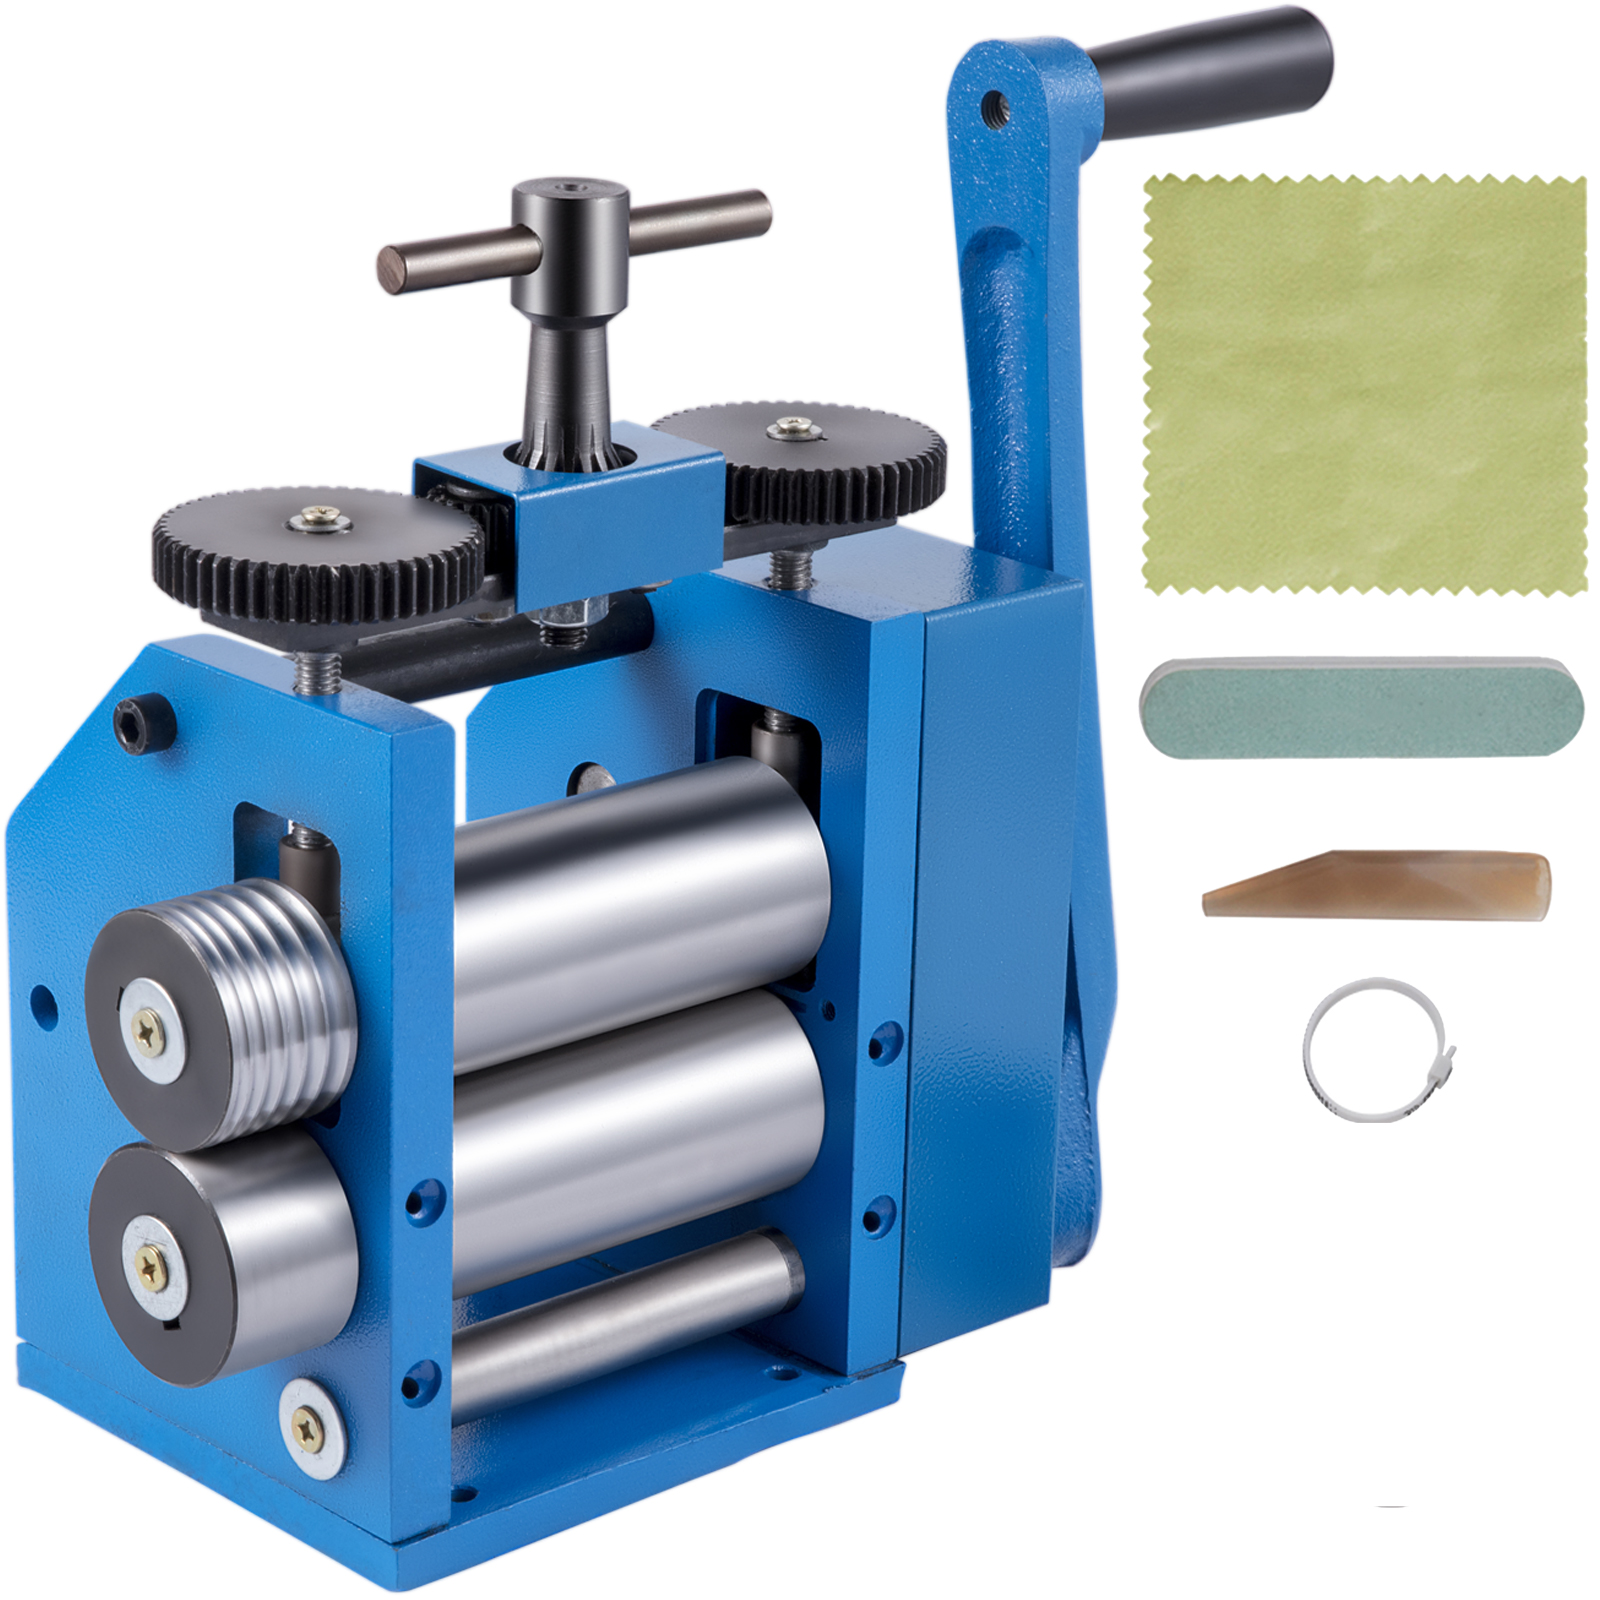 Commercial 85mm Rolling Mill Machine Rollers Metal Sheet Wire Flat Jewelry  Press Tool DIY Repair Manual Combination (Green)